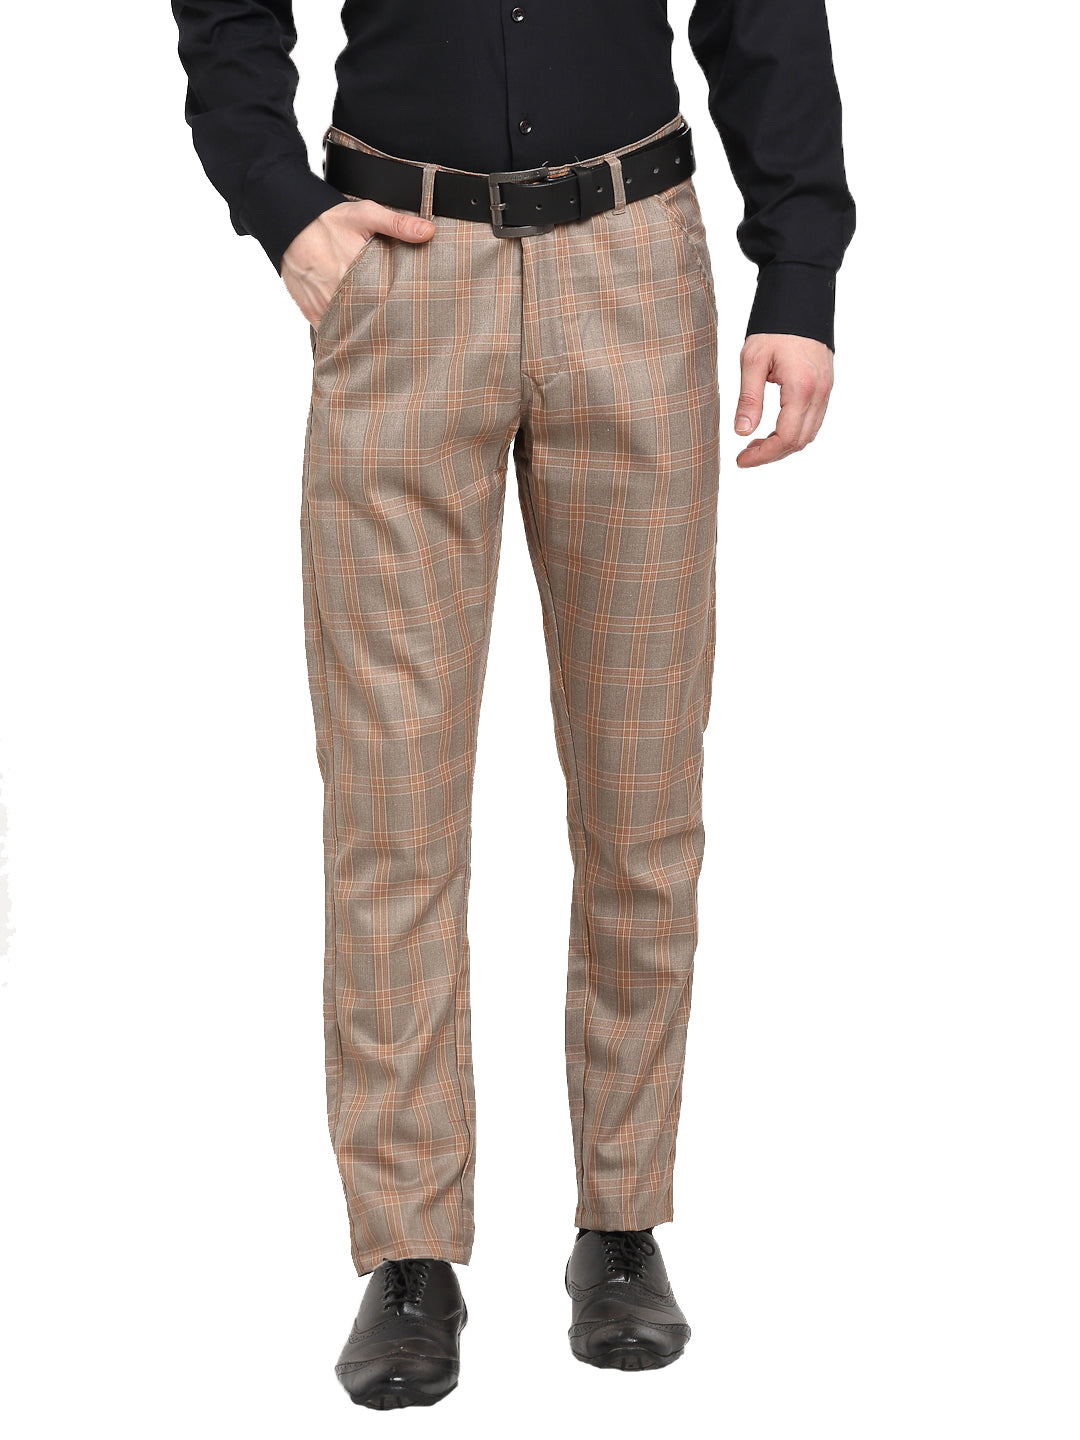 Pink and brown check Beau trousers - Collagerie